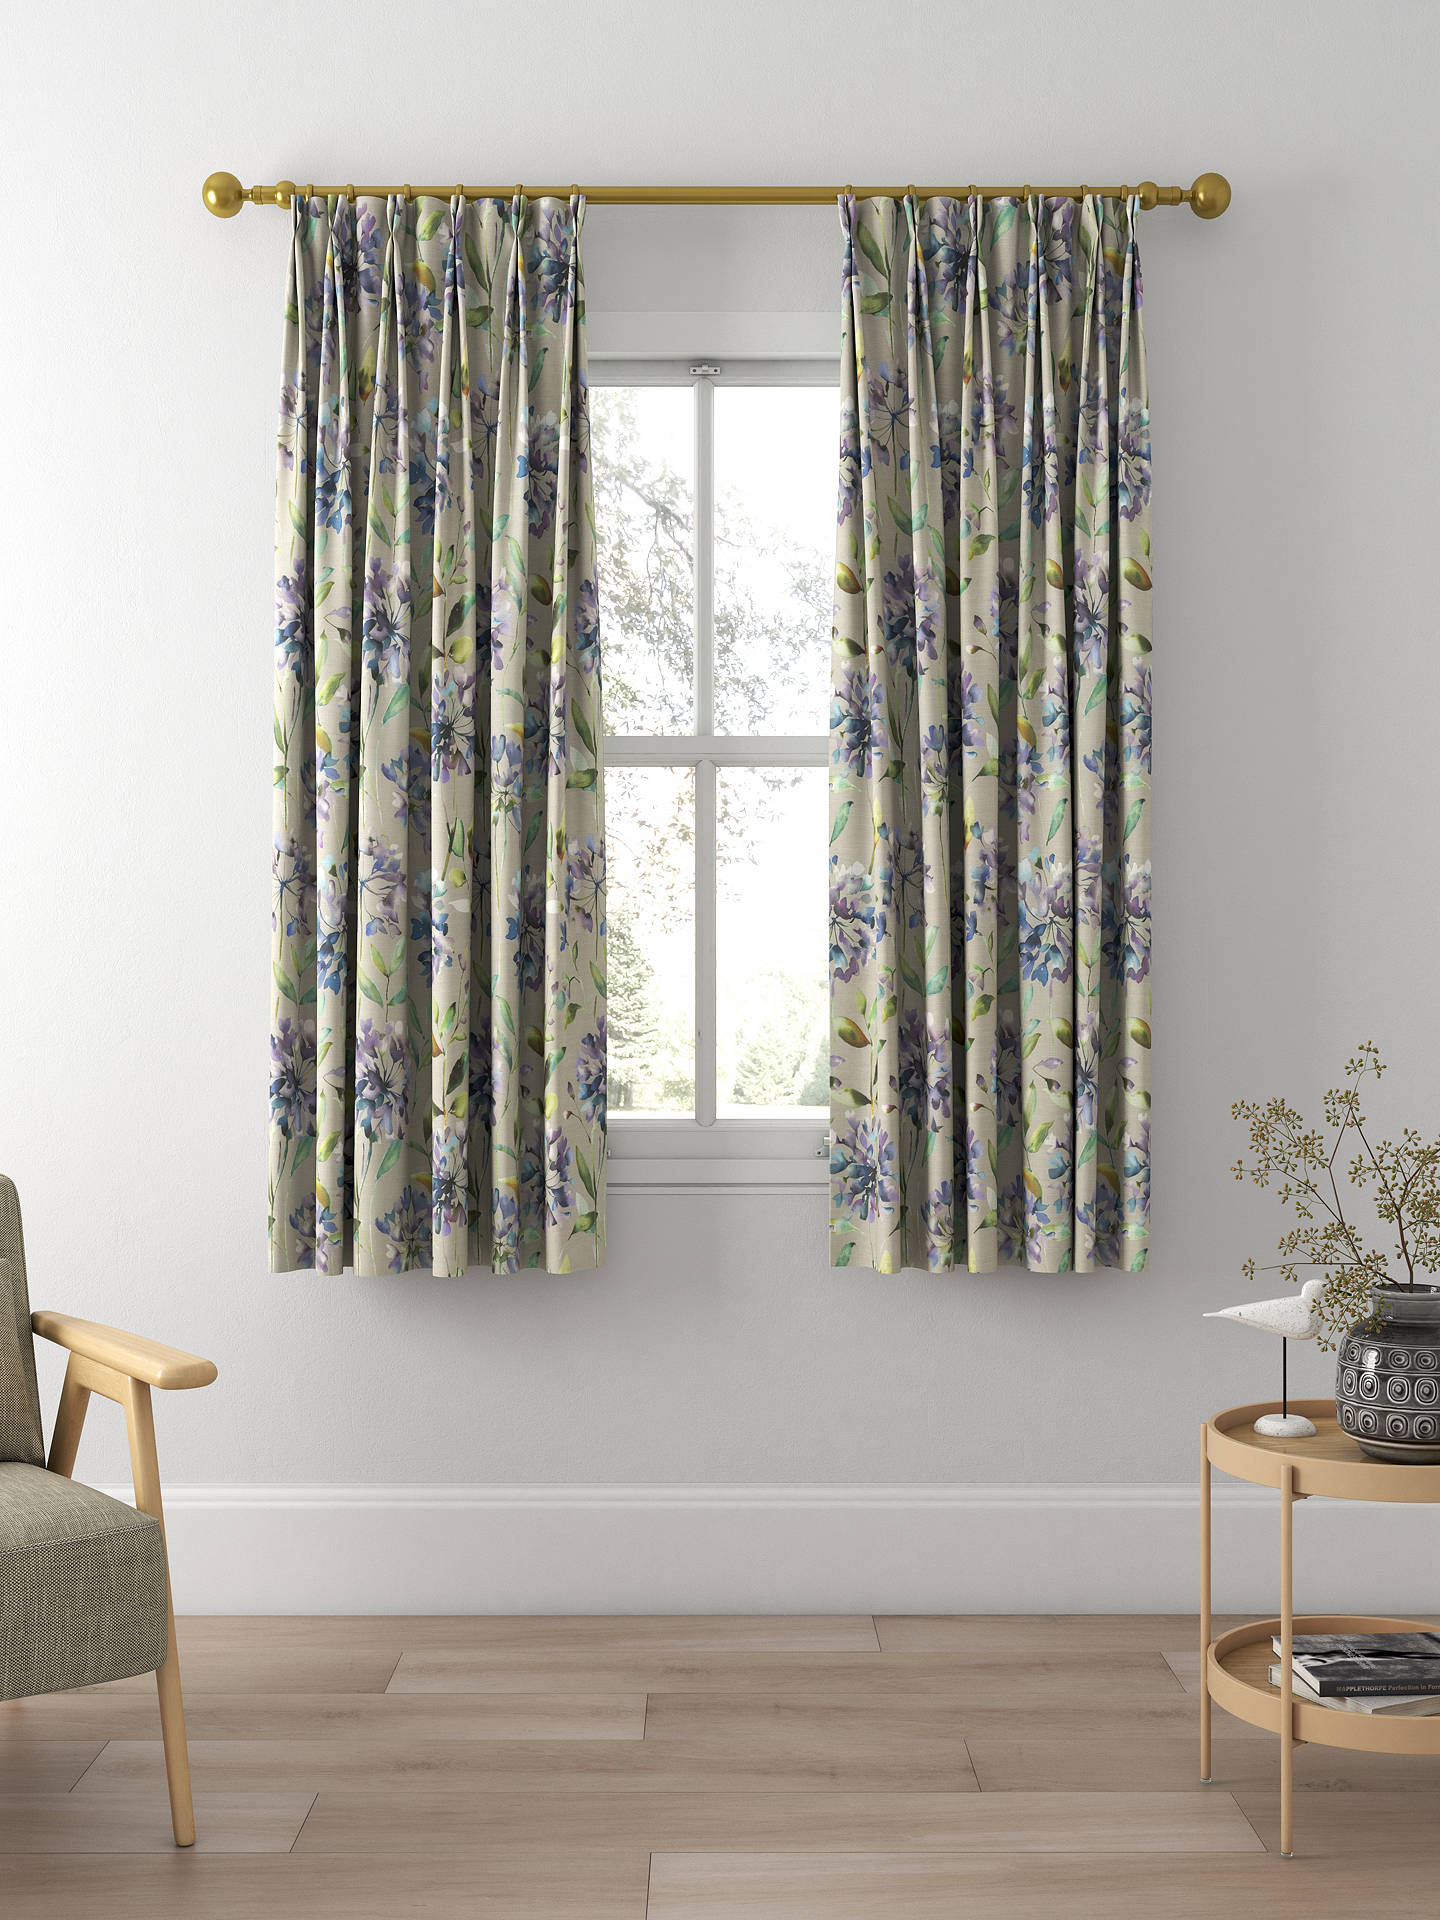 Voyage Clovelly Made to Measure Curtains, Violet